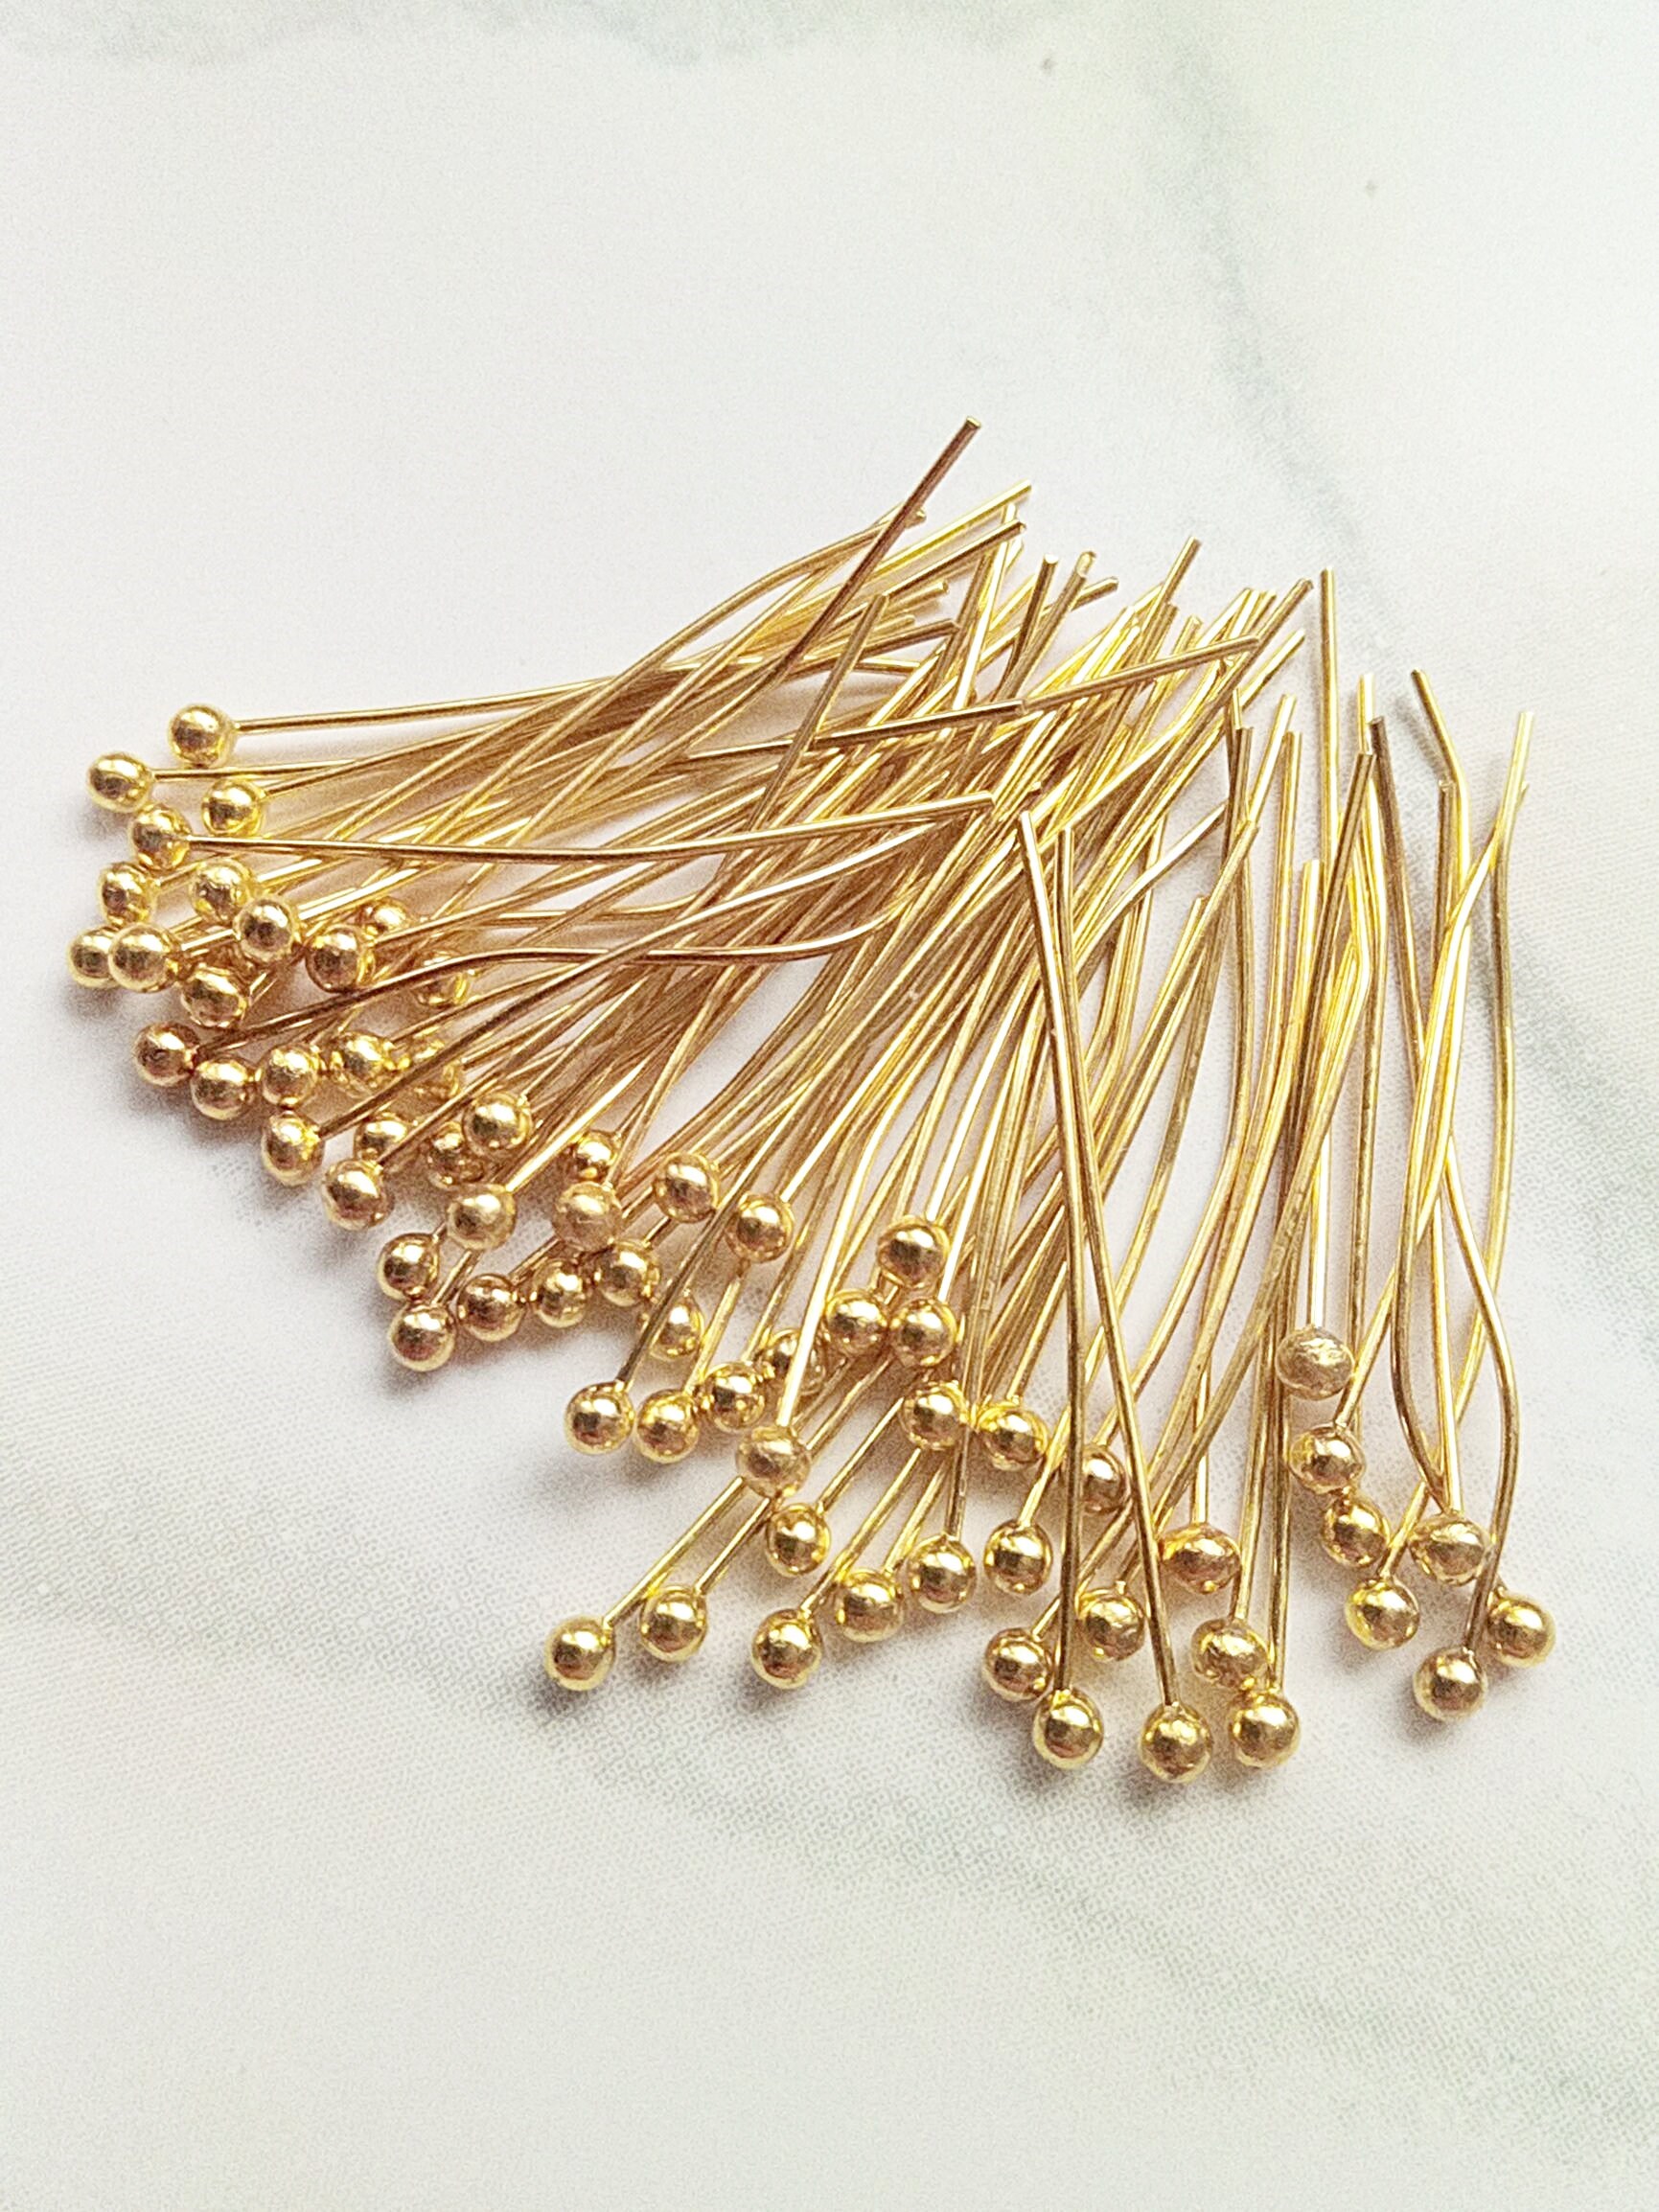 500 Gold Plated Hat Head Pins Jewelry Beading 2" 21 Gauge 